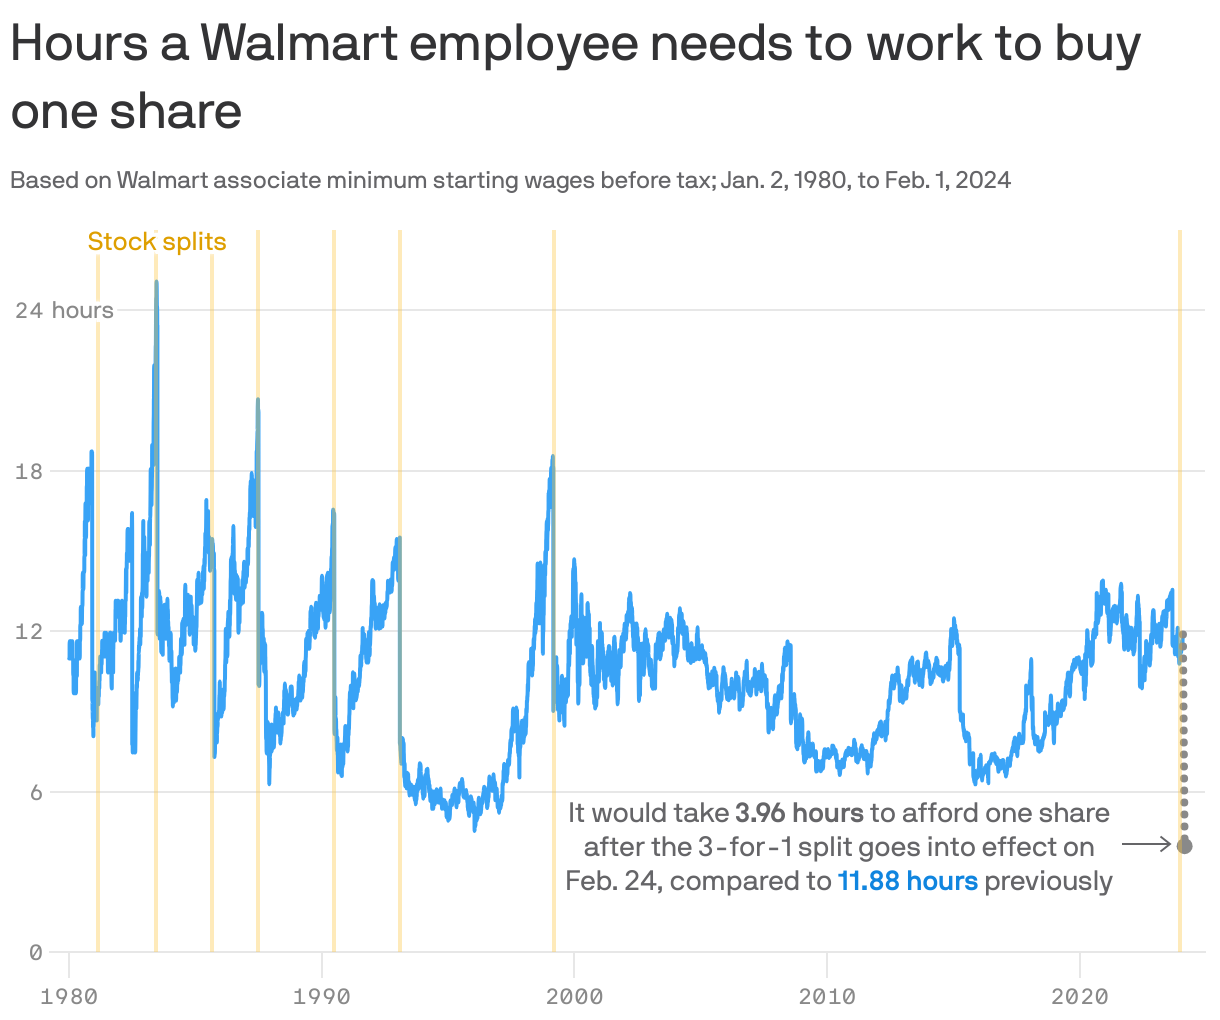 Hours a Walmart employee needs to work to buy one share